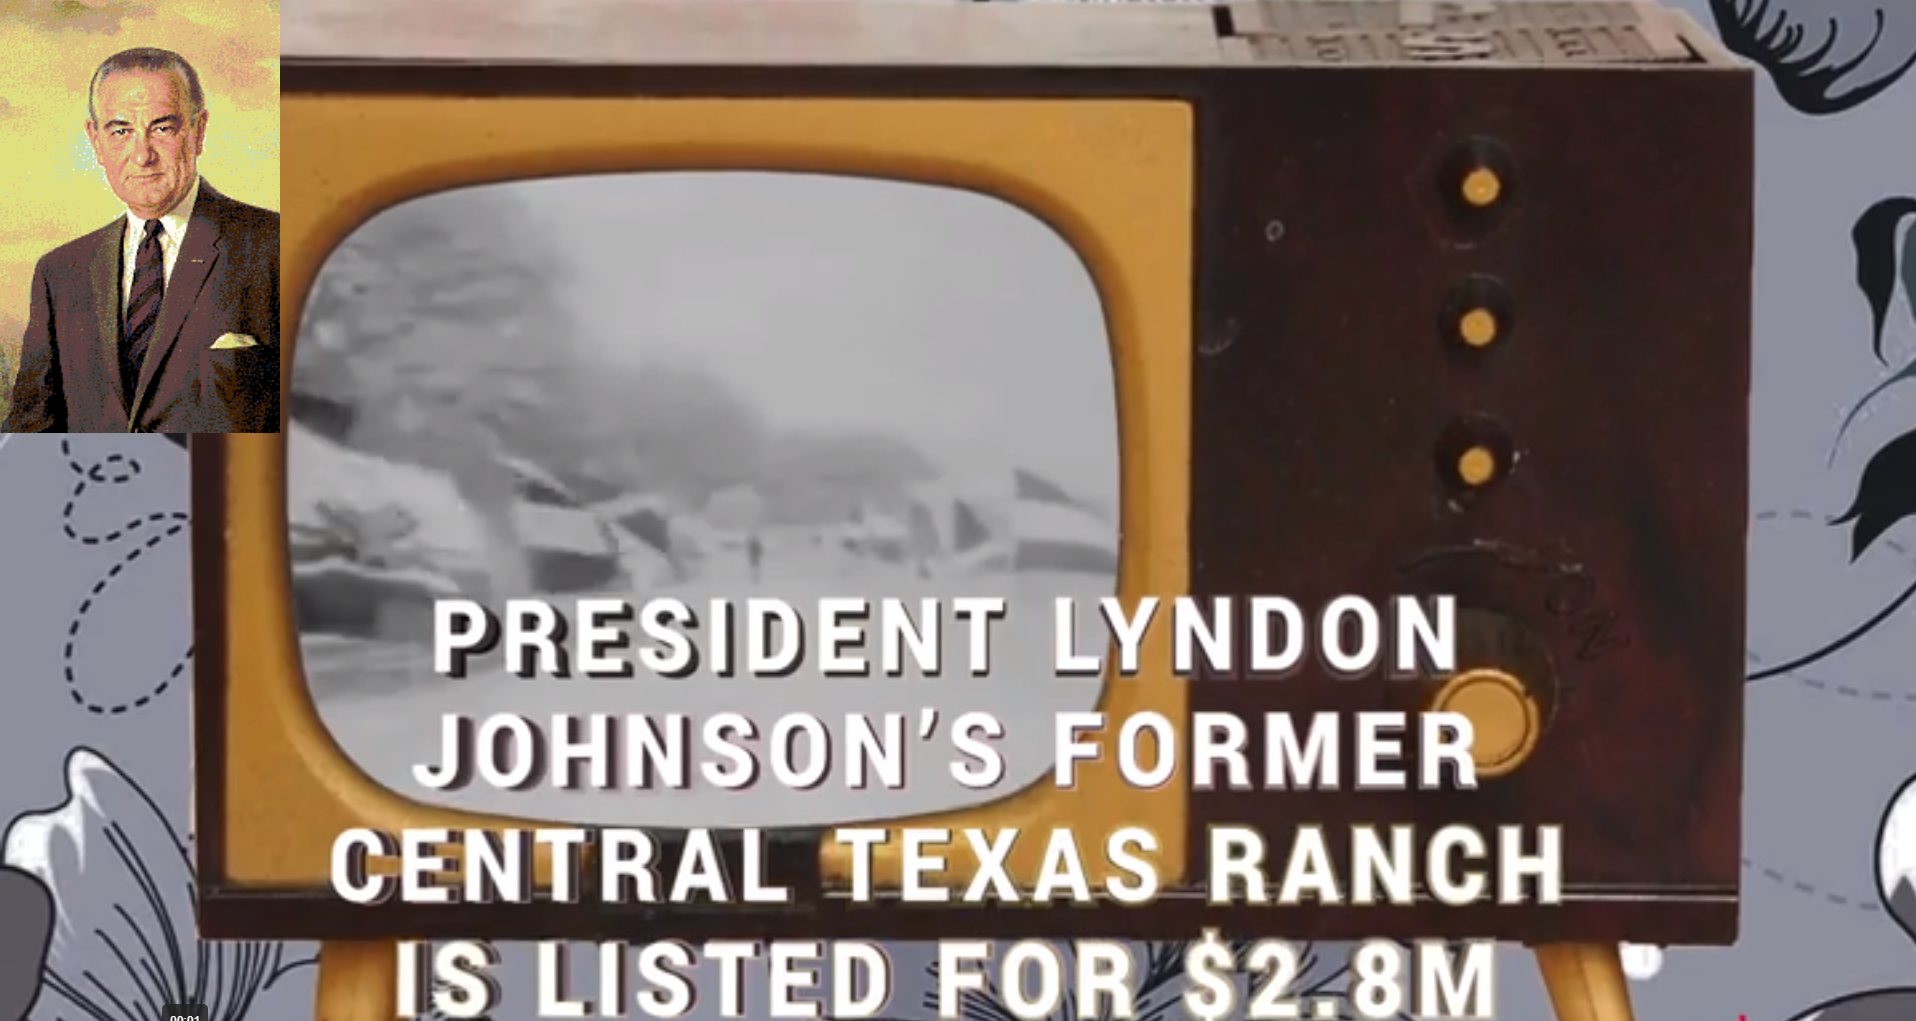 President Johnson Texas home is on the market for sale. It is listed at $2.8 million